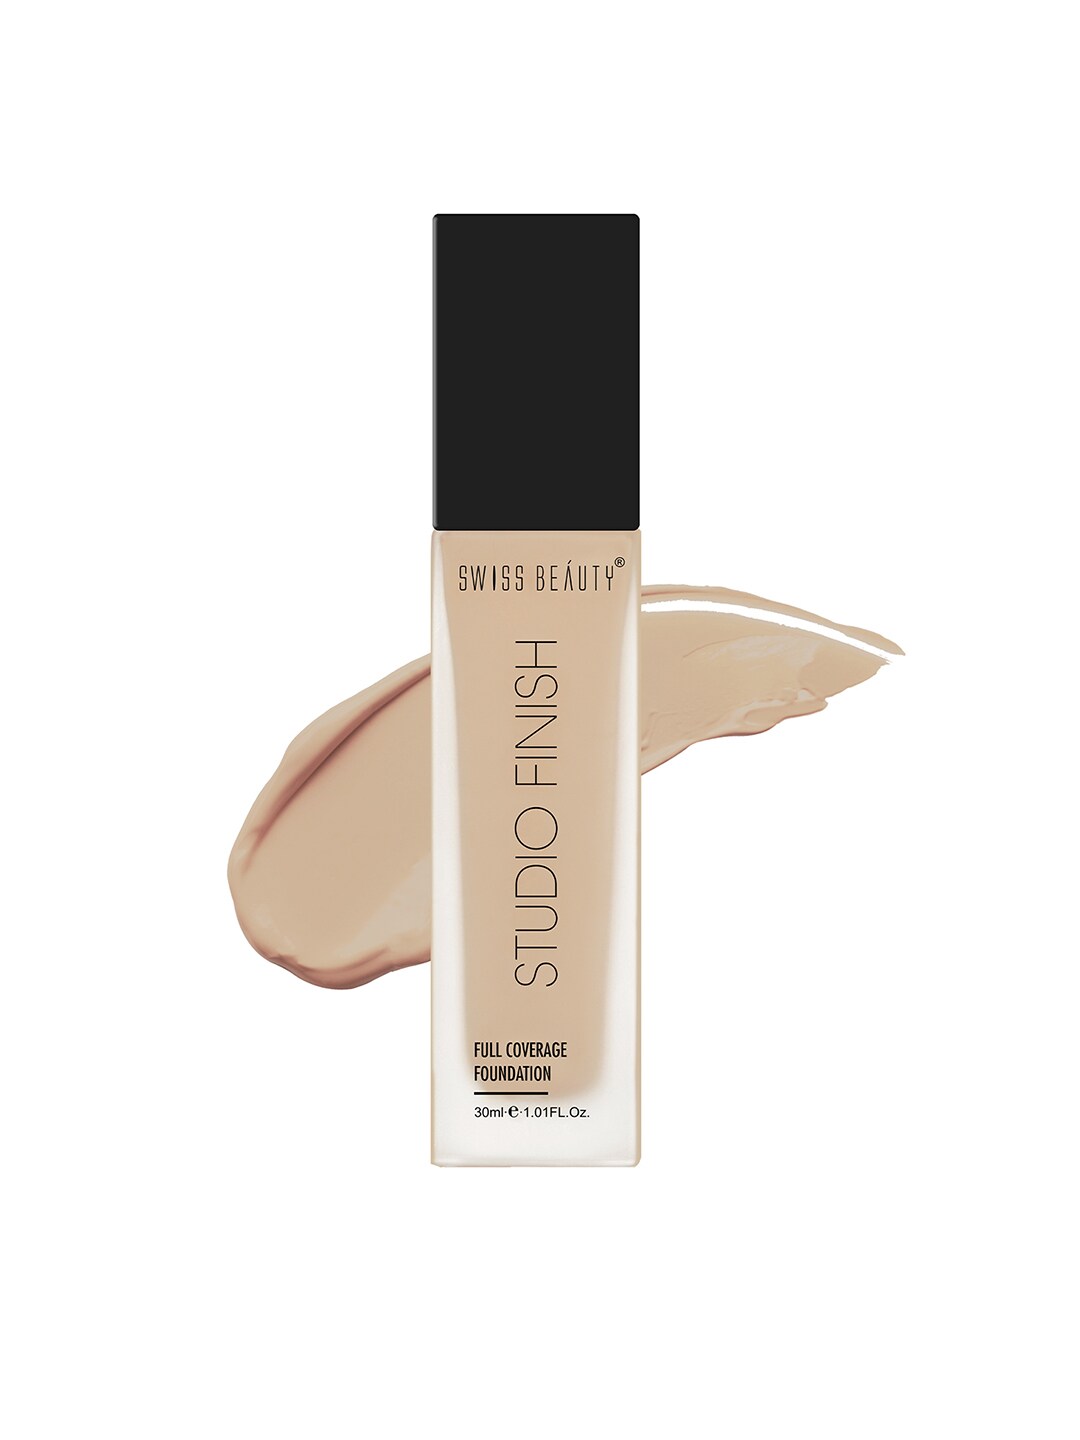 SWISS BEAUTY Studio Finish Full Coverage Foundation - Natural Beige Price in India